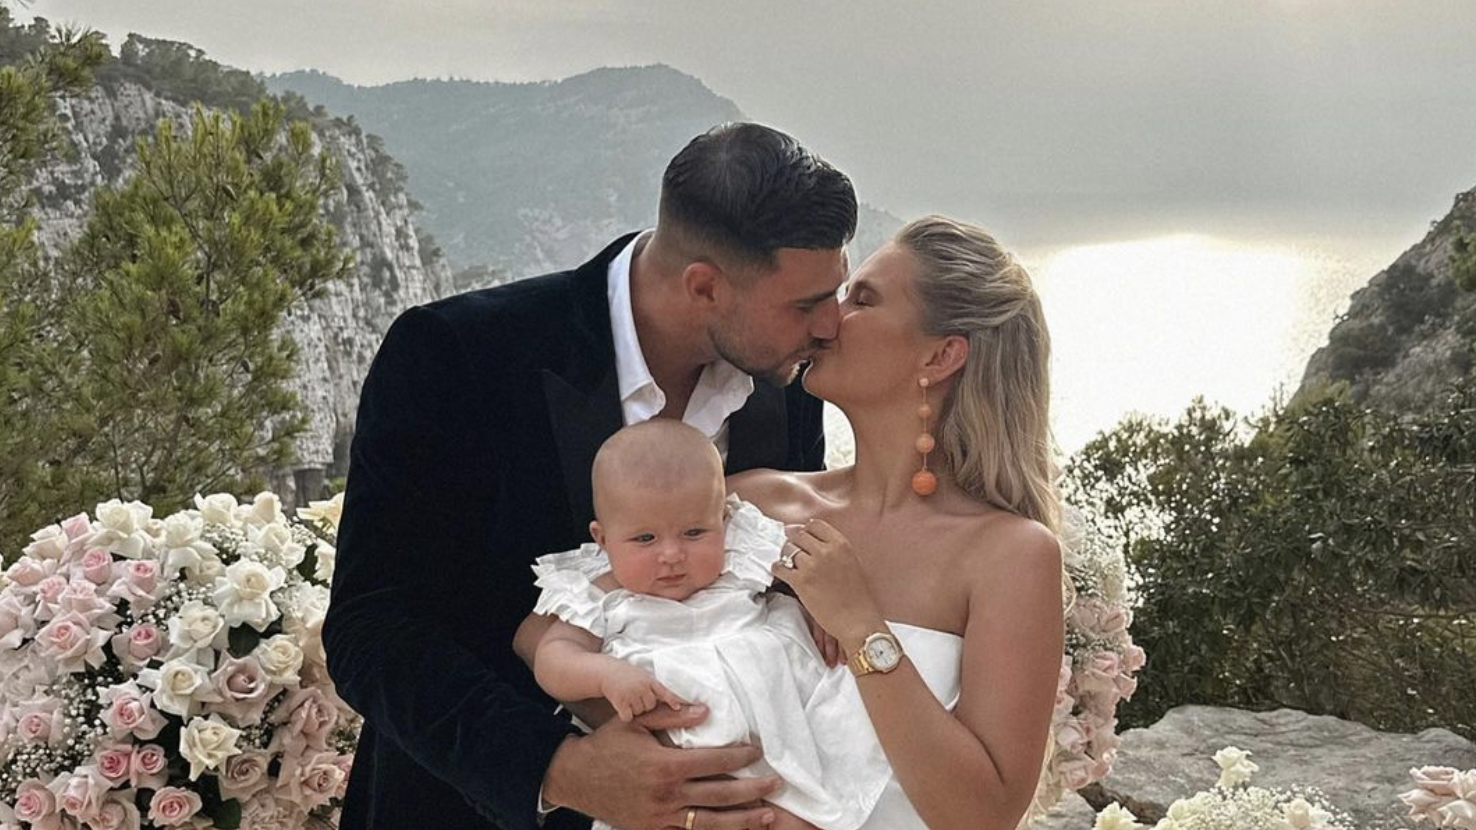 Molly-Mae Hague and Tommy Fury are seen for first time after saying they  are expecting a baby girl